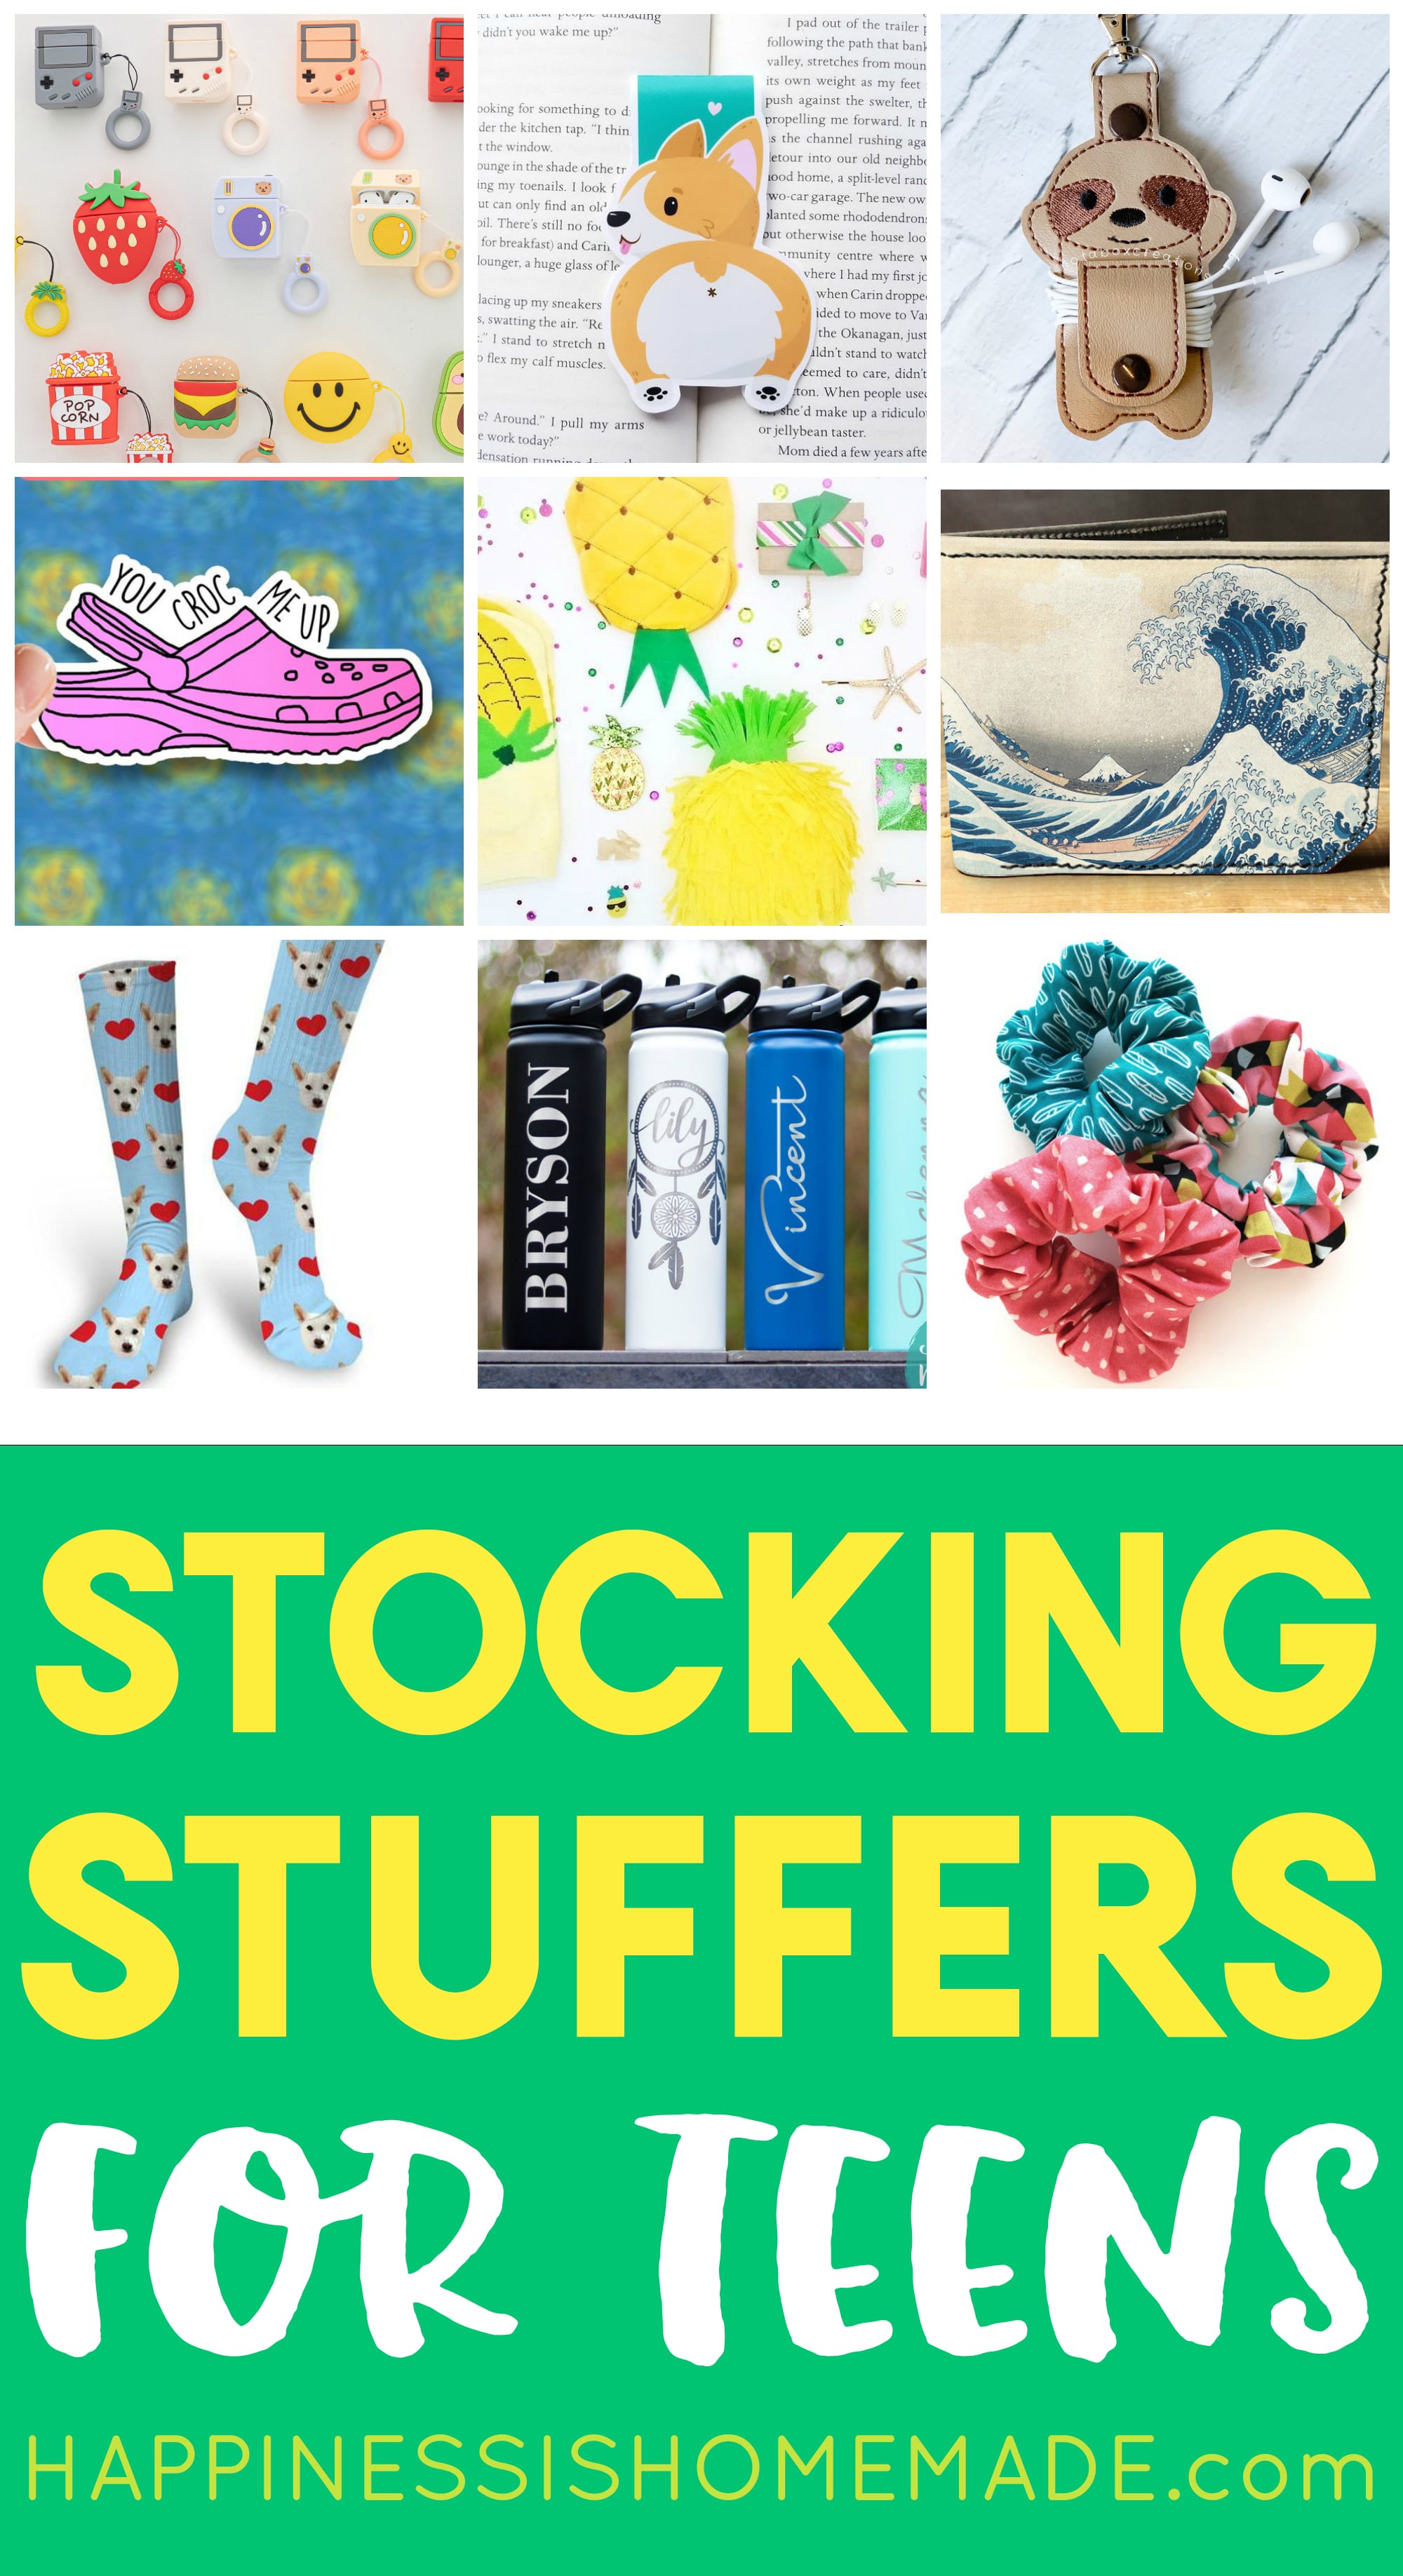 70+ Fun Stocking Stuffers for Teens and Tweens - Happiness is Homemade